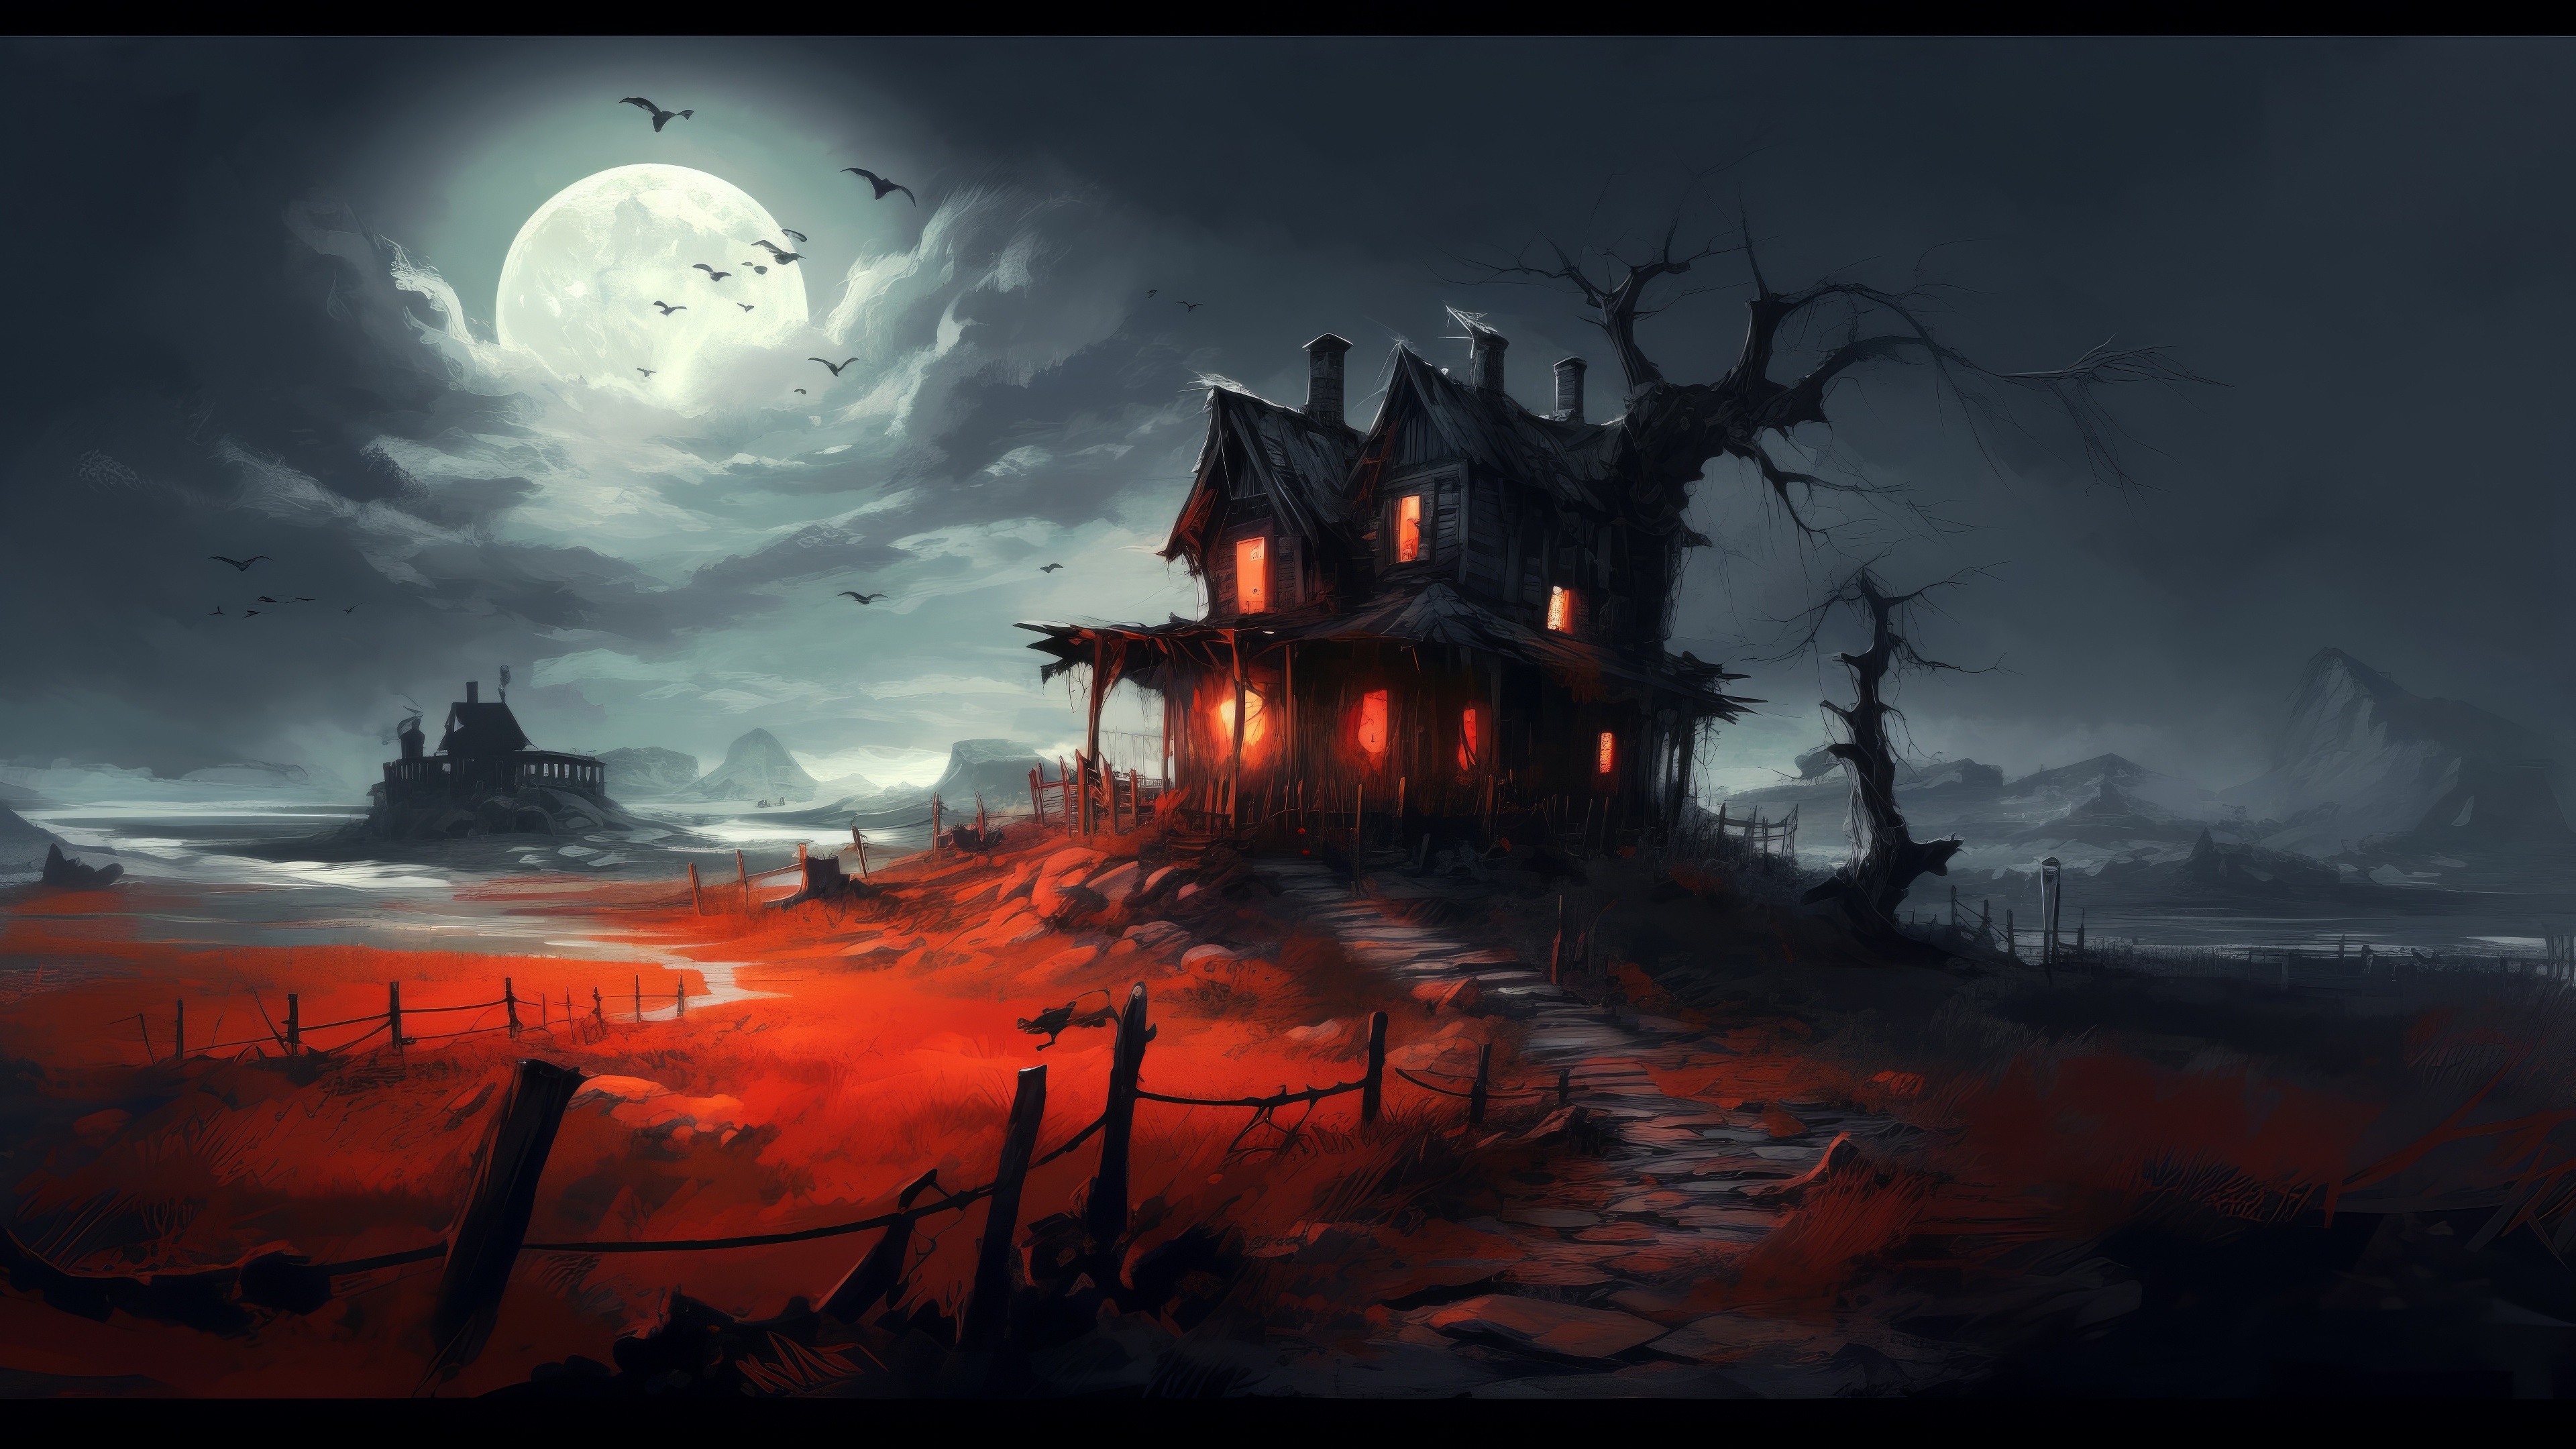 Witch`s hut under the full moon